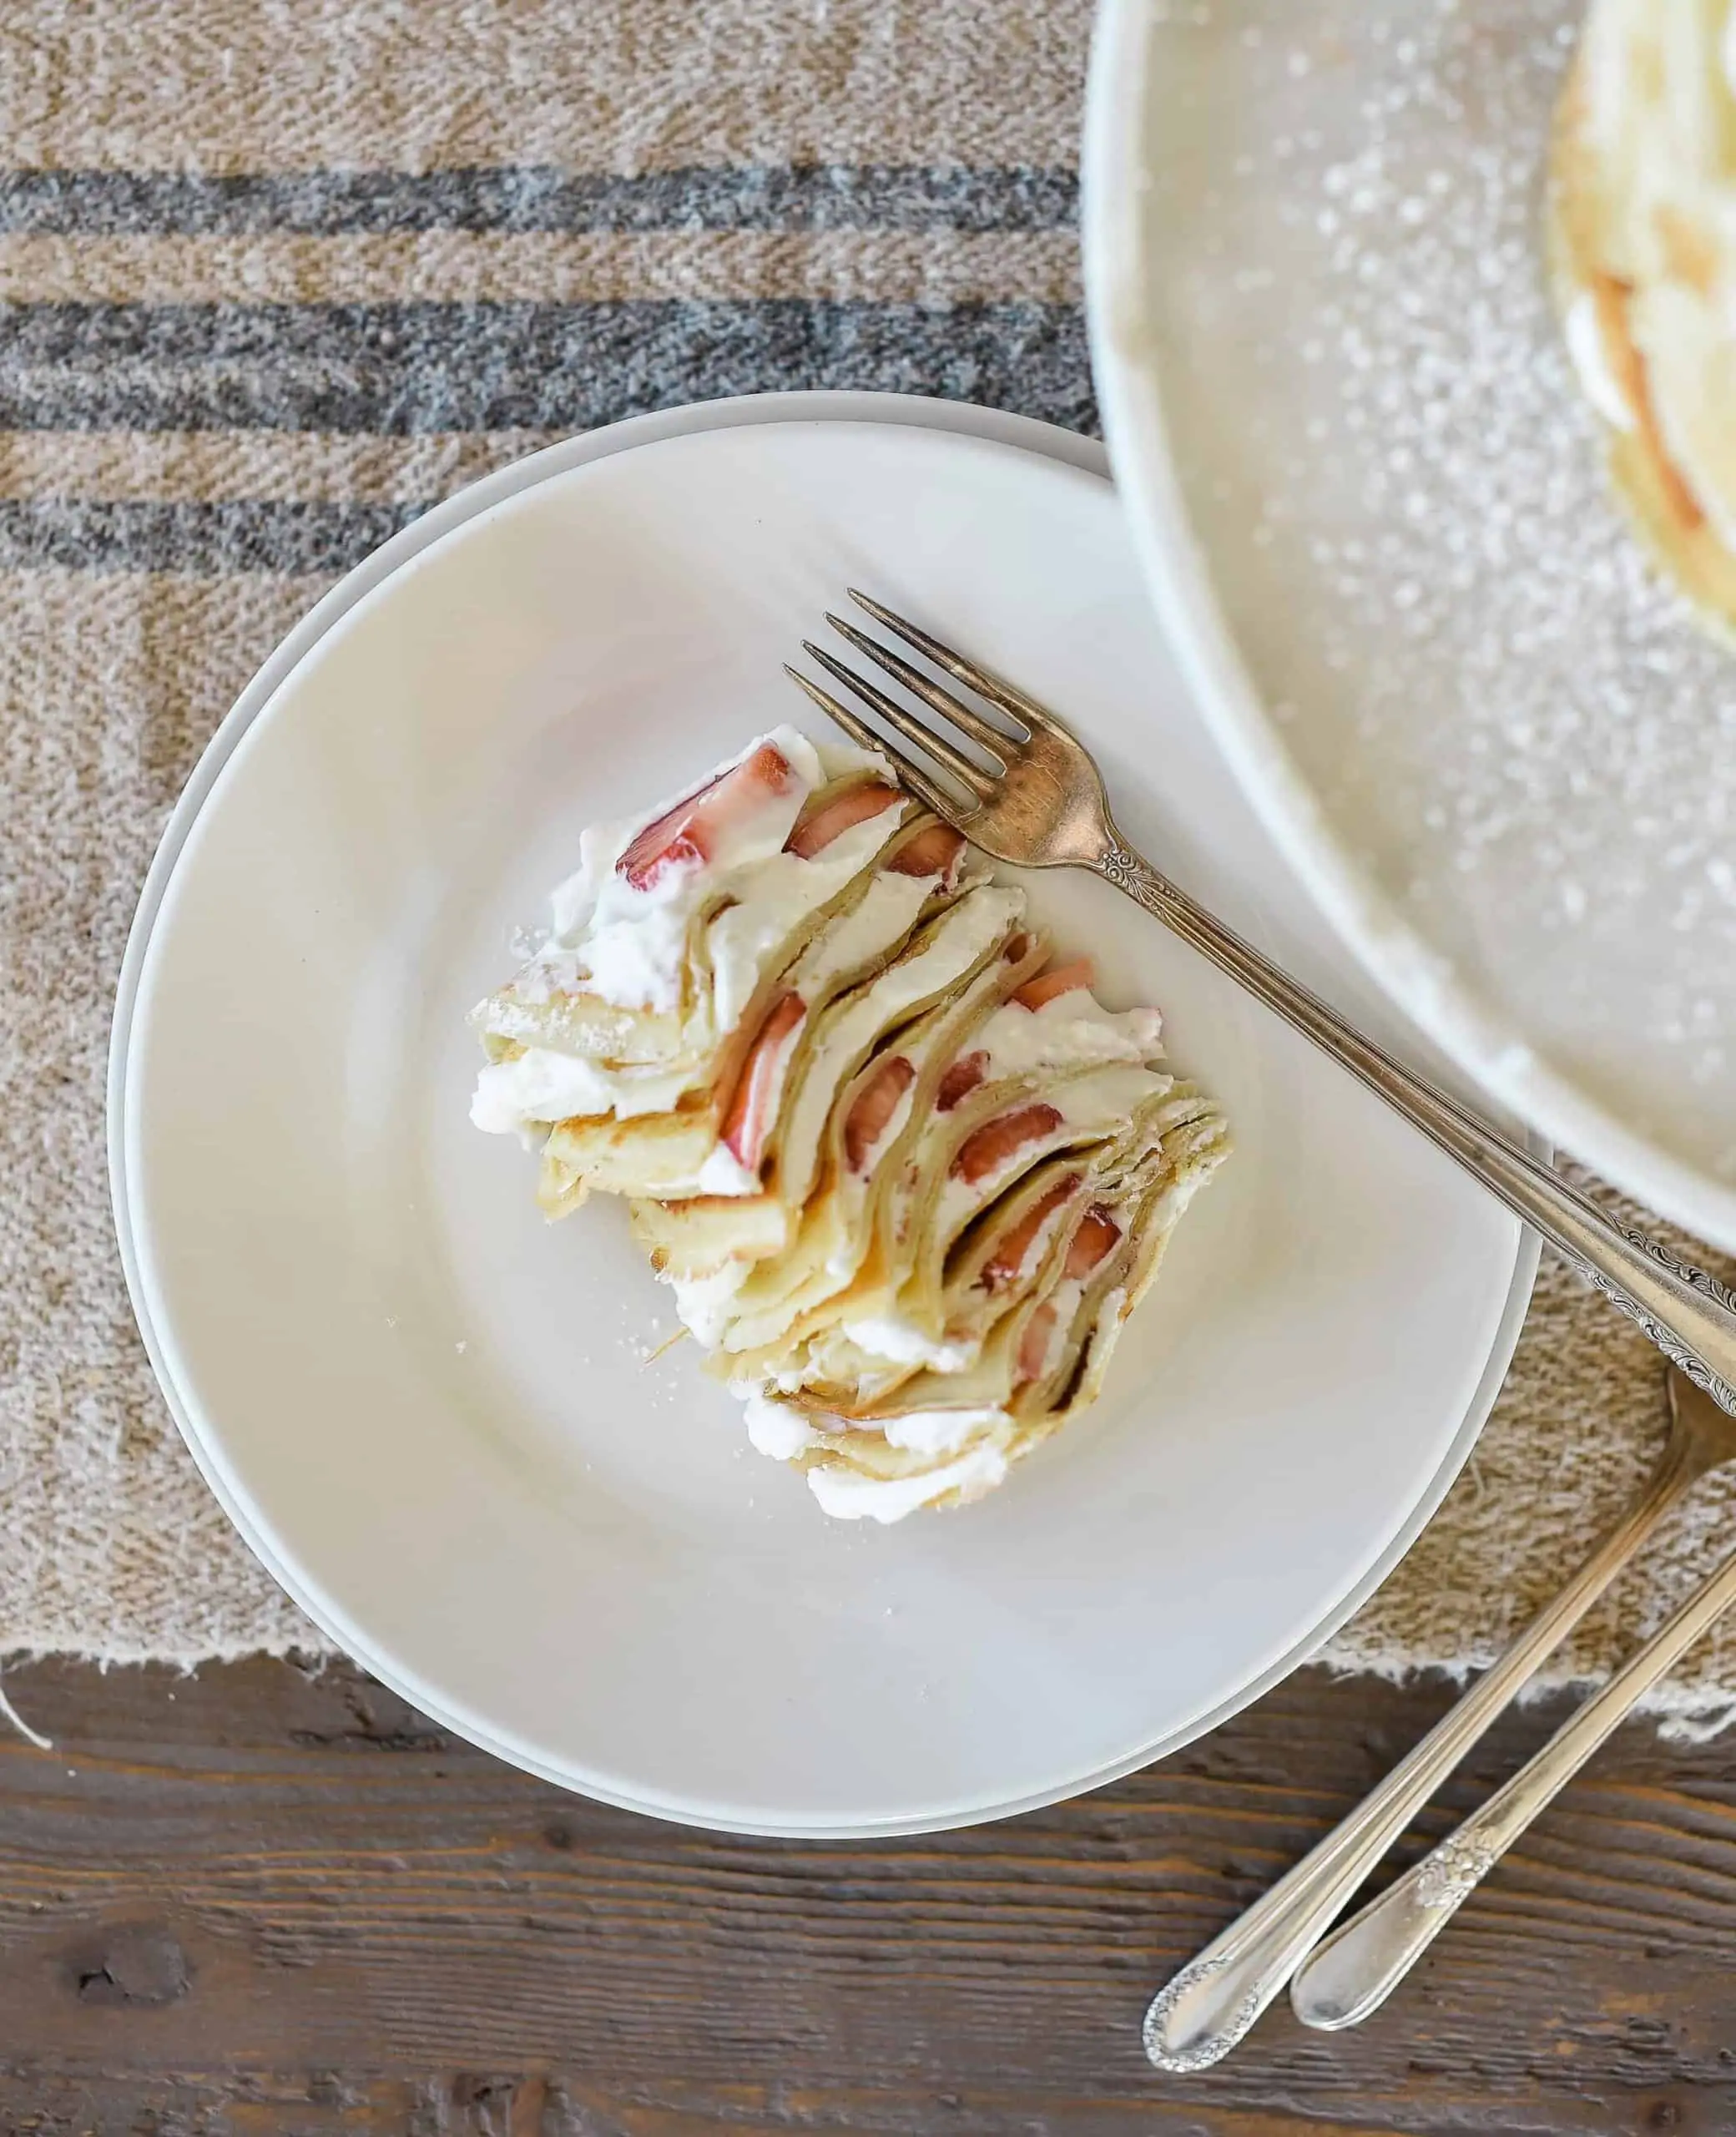 This crepe cake recipe is a show-stopper, and is perfect for special occasions! The cake is made of delicate crepes and filled with strawberries & whipped cream!